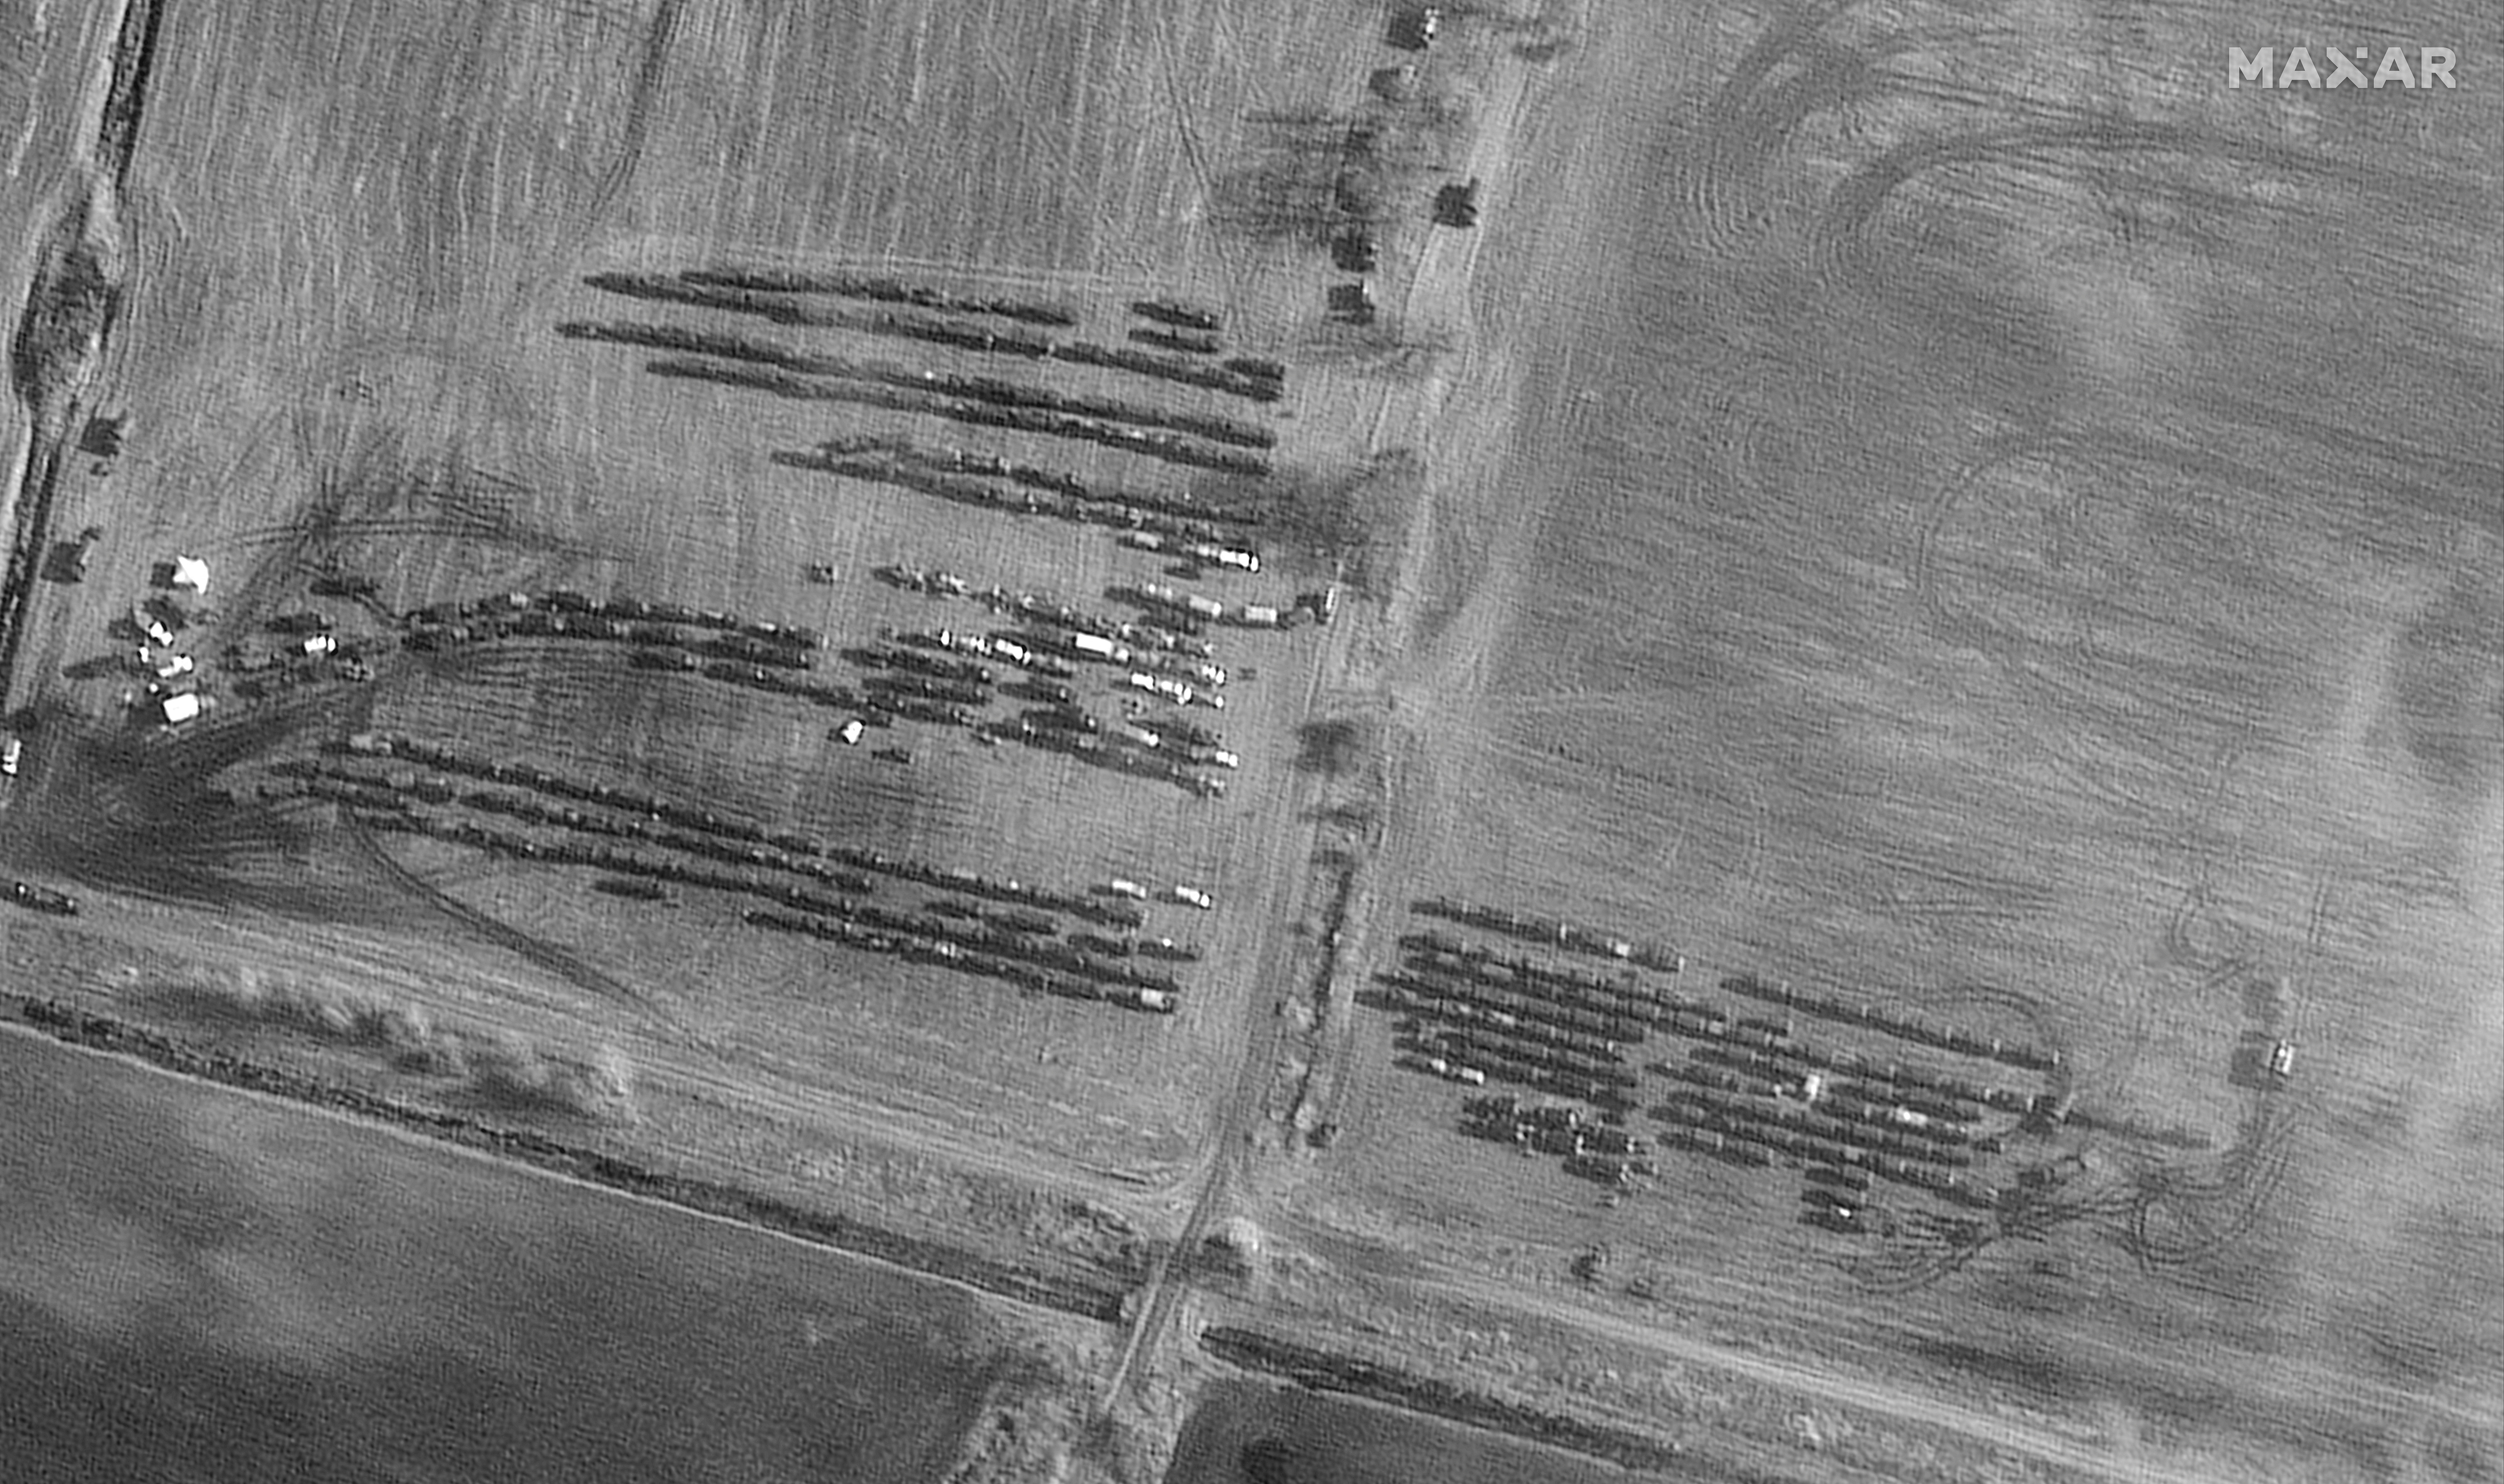 Satellite imagery shows ground forces deployment, northeast of Chojniki